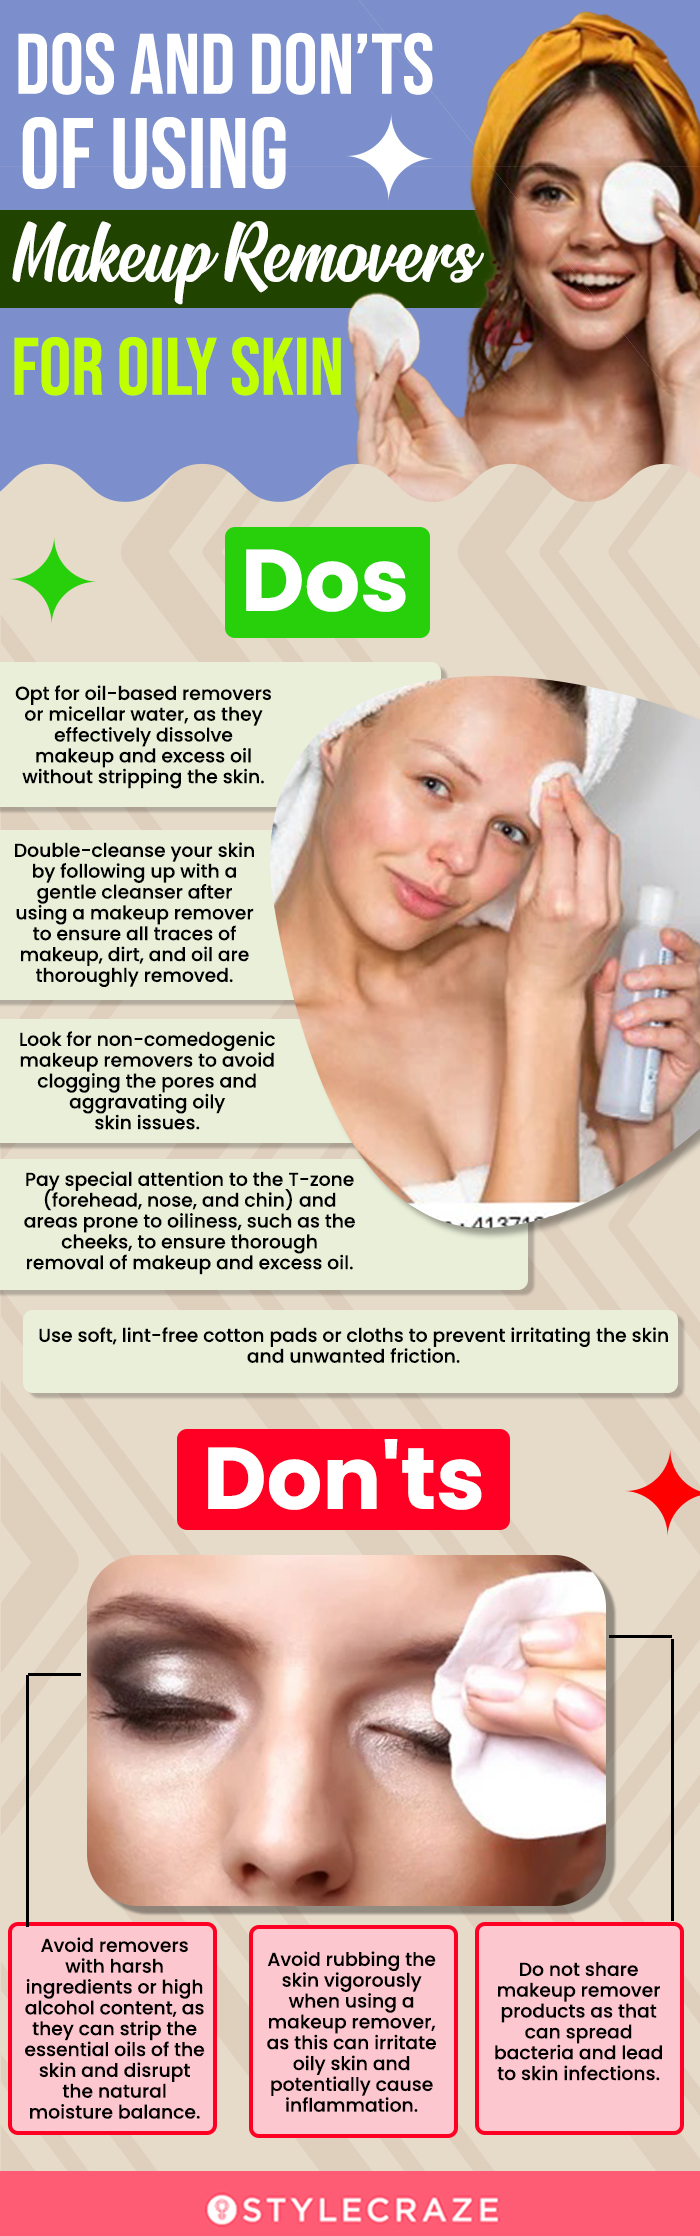 Dos And Don'ts Of Using Makeup Removers For Oily Skin (infographic)